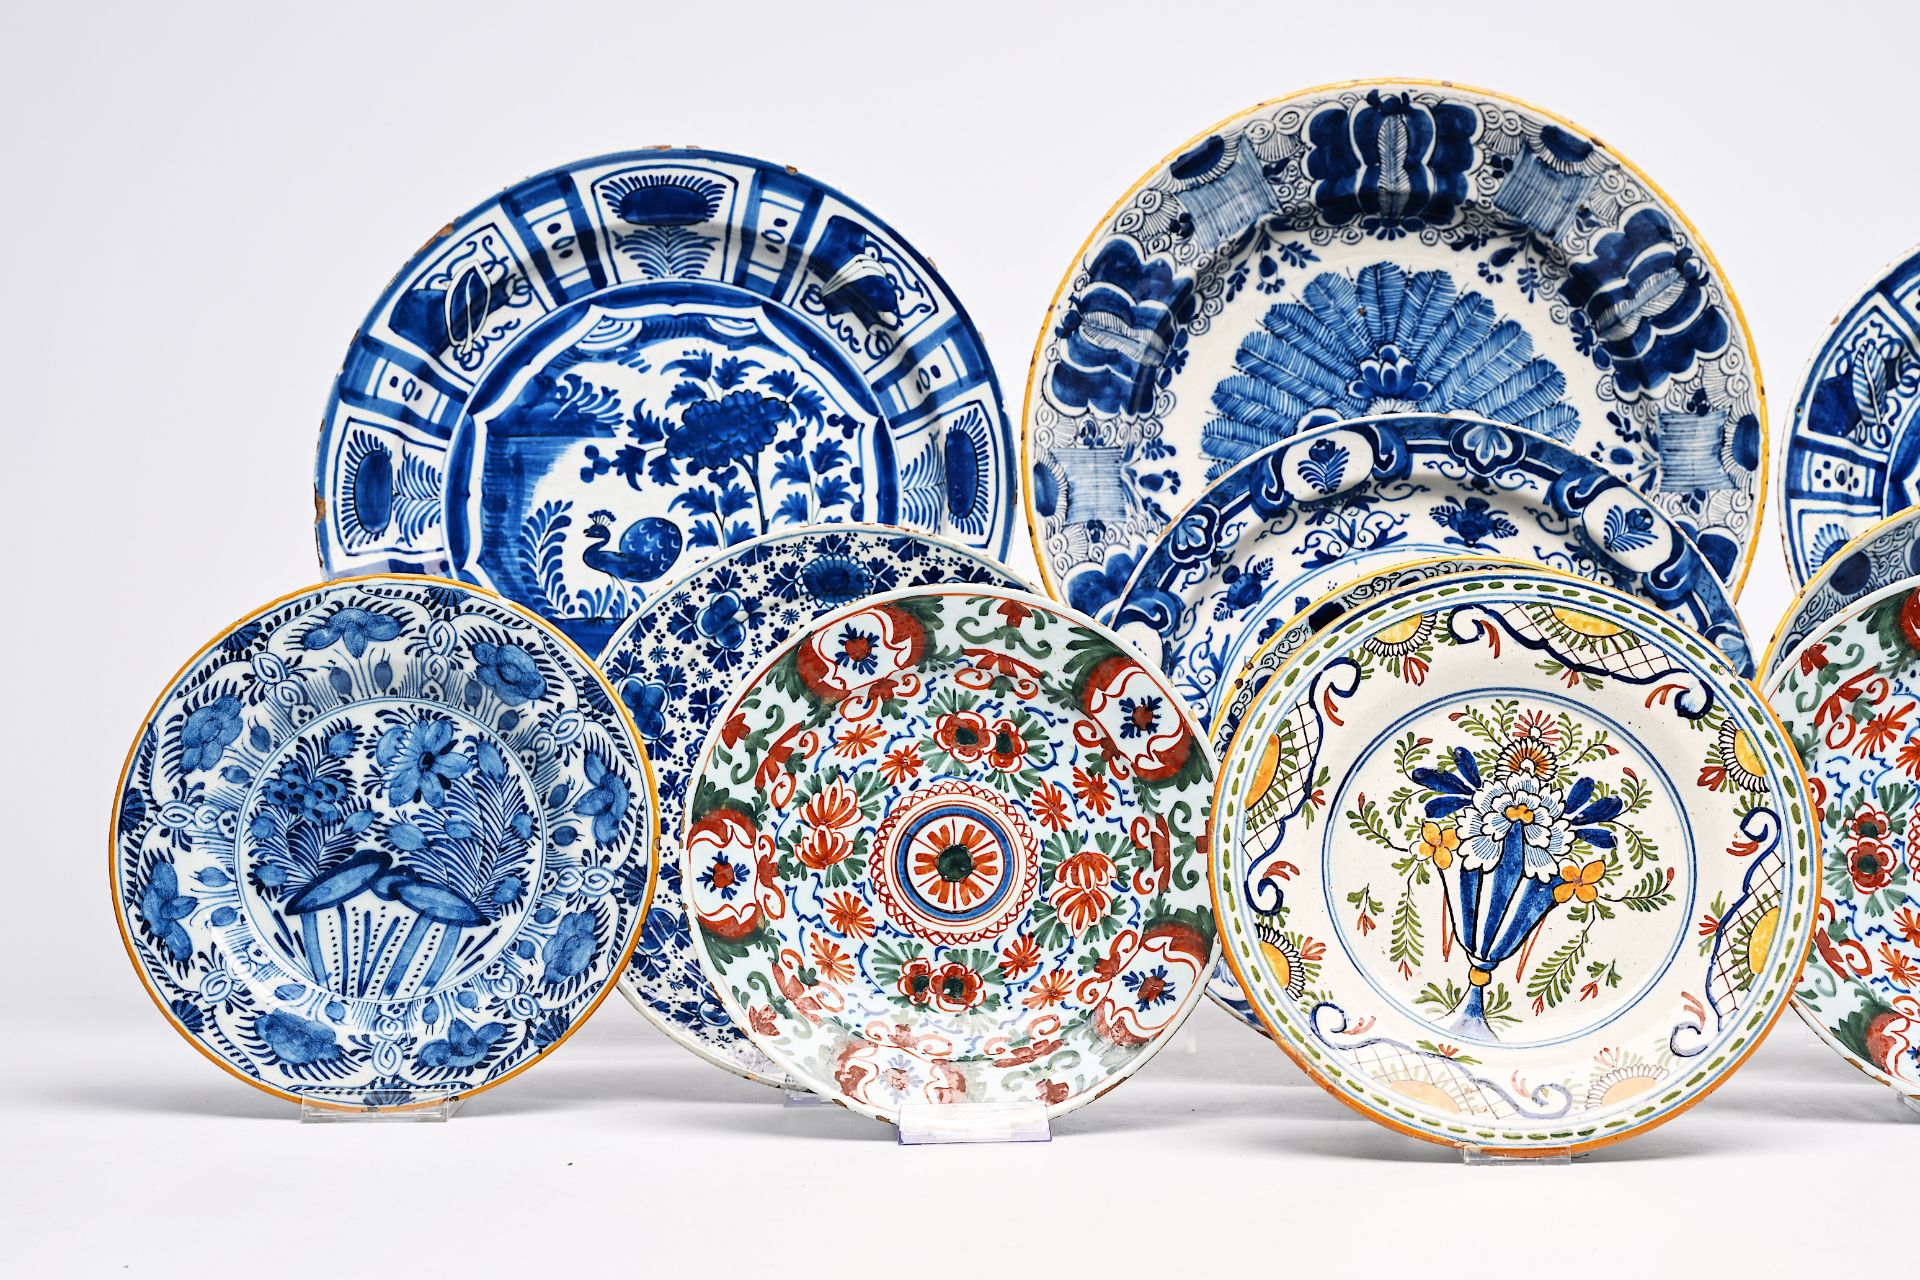 Twelve Dutch Delft blue and white and polychrome plates and dishes, 18th C. - Image 2 of 7